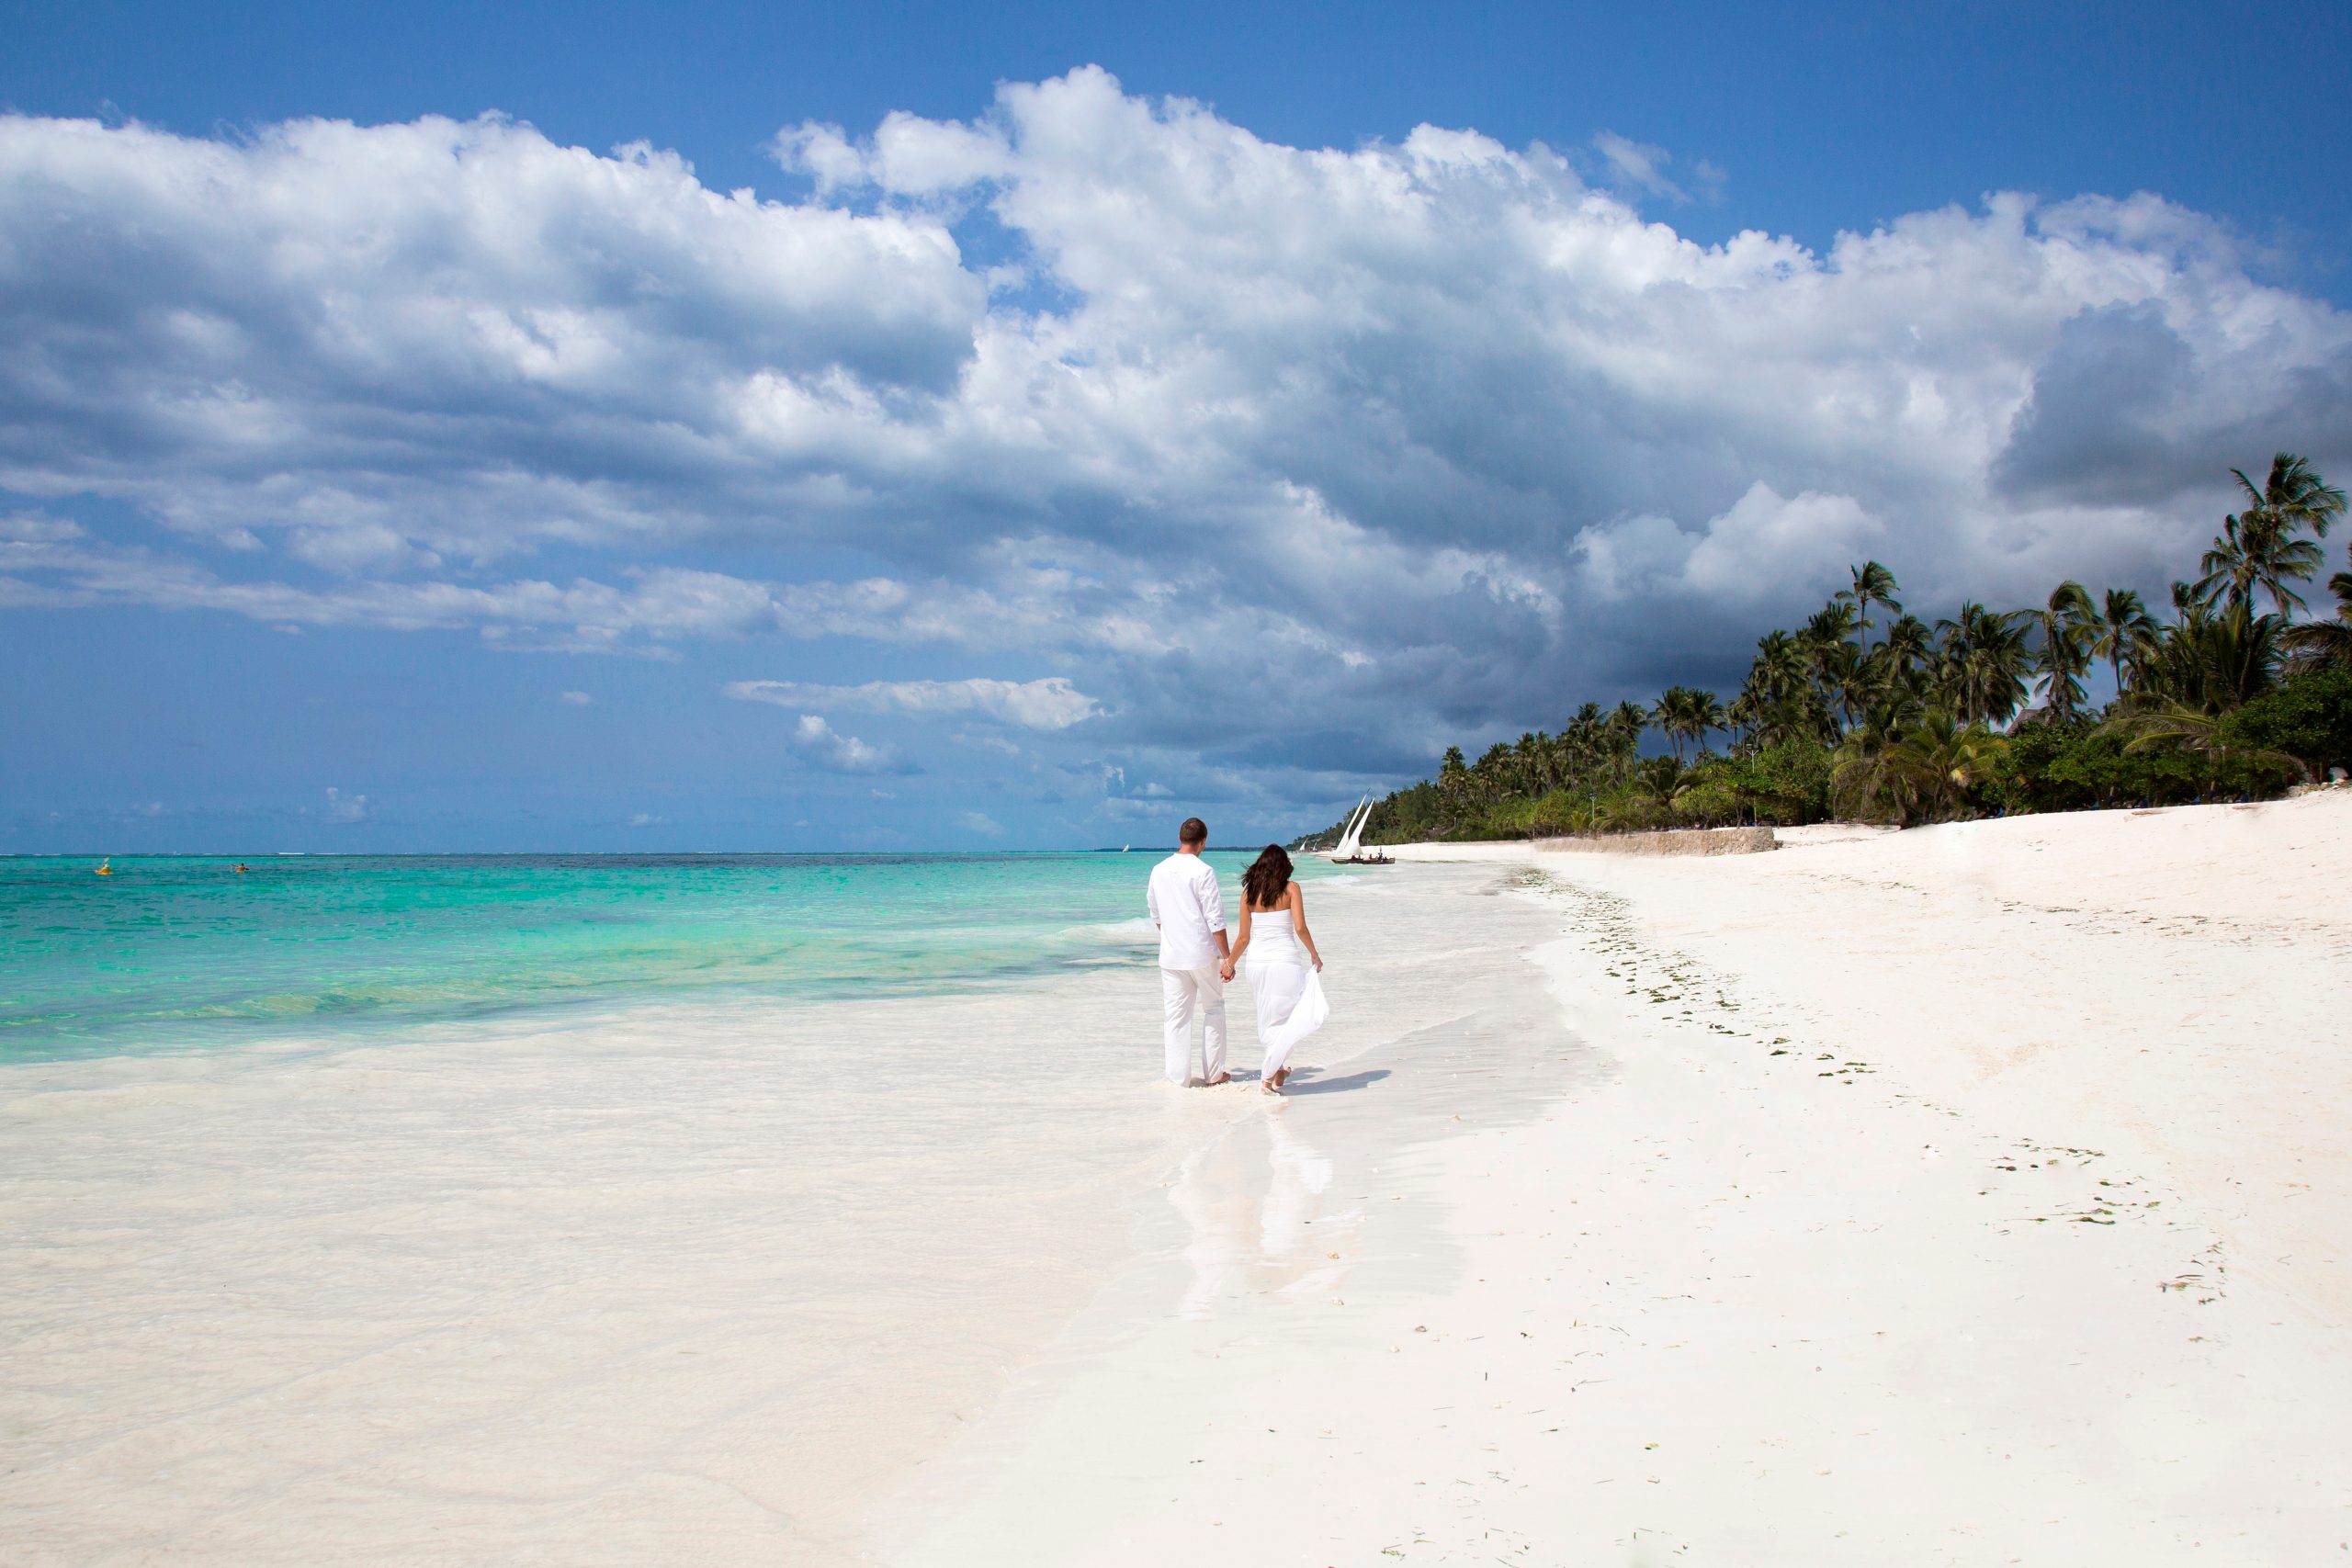 Wedding venues in Zanzibar: Why choose this destination for your